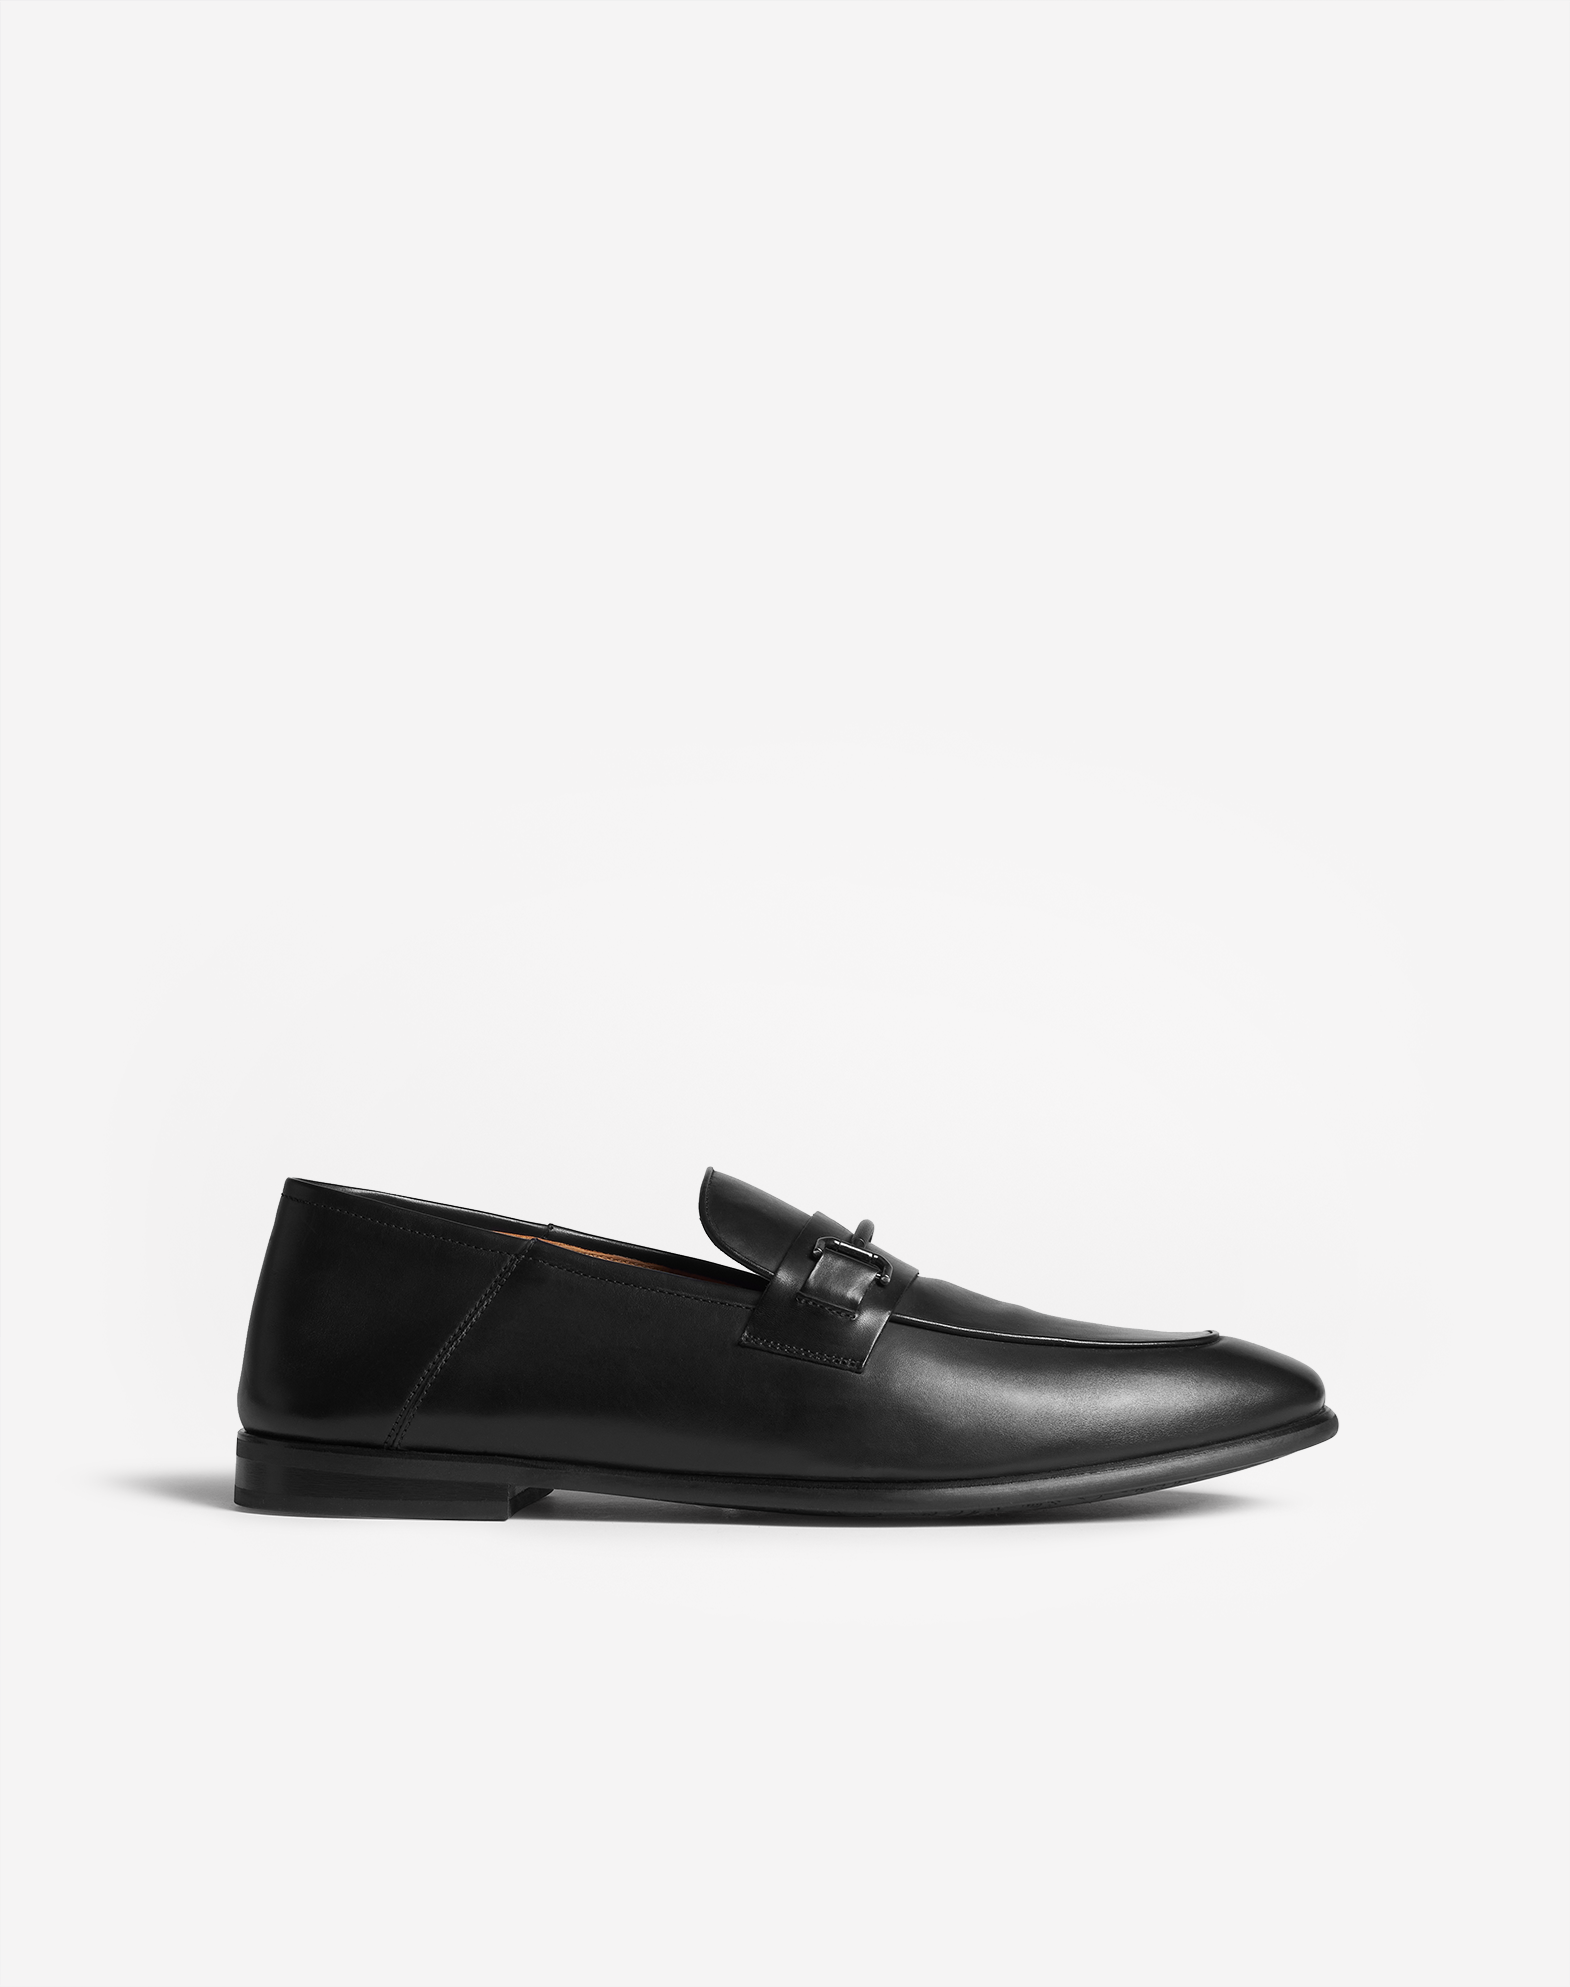 Dunhill Men's Loafers